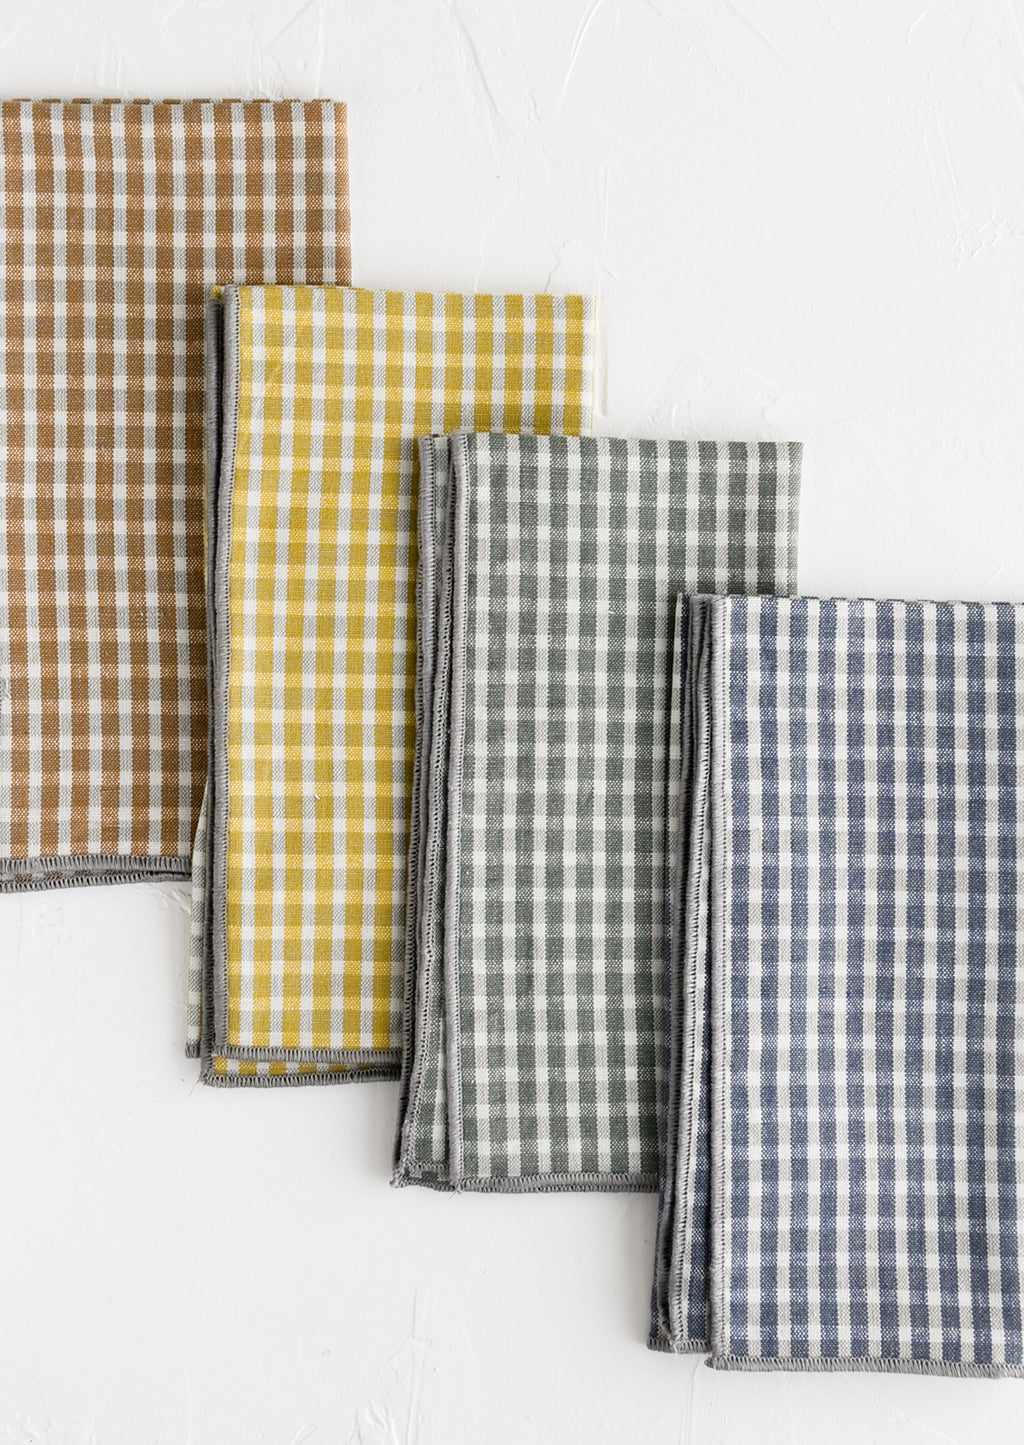 2: A set of four plaid print napkins in a mix of colors.